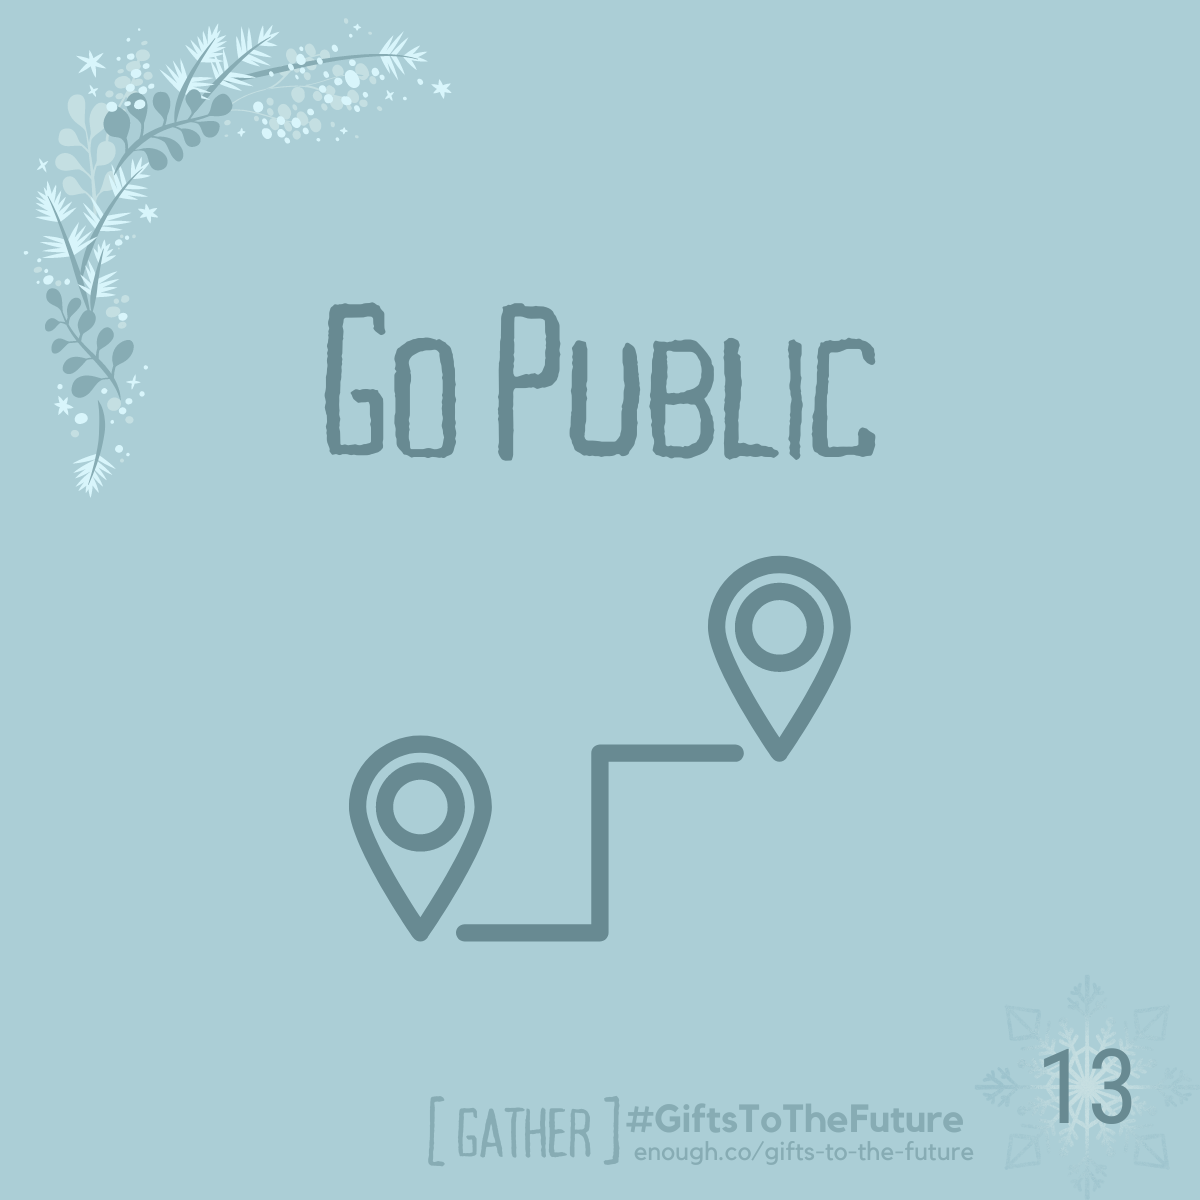 wintry soft blue image that reads "go public"